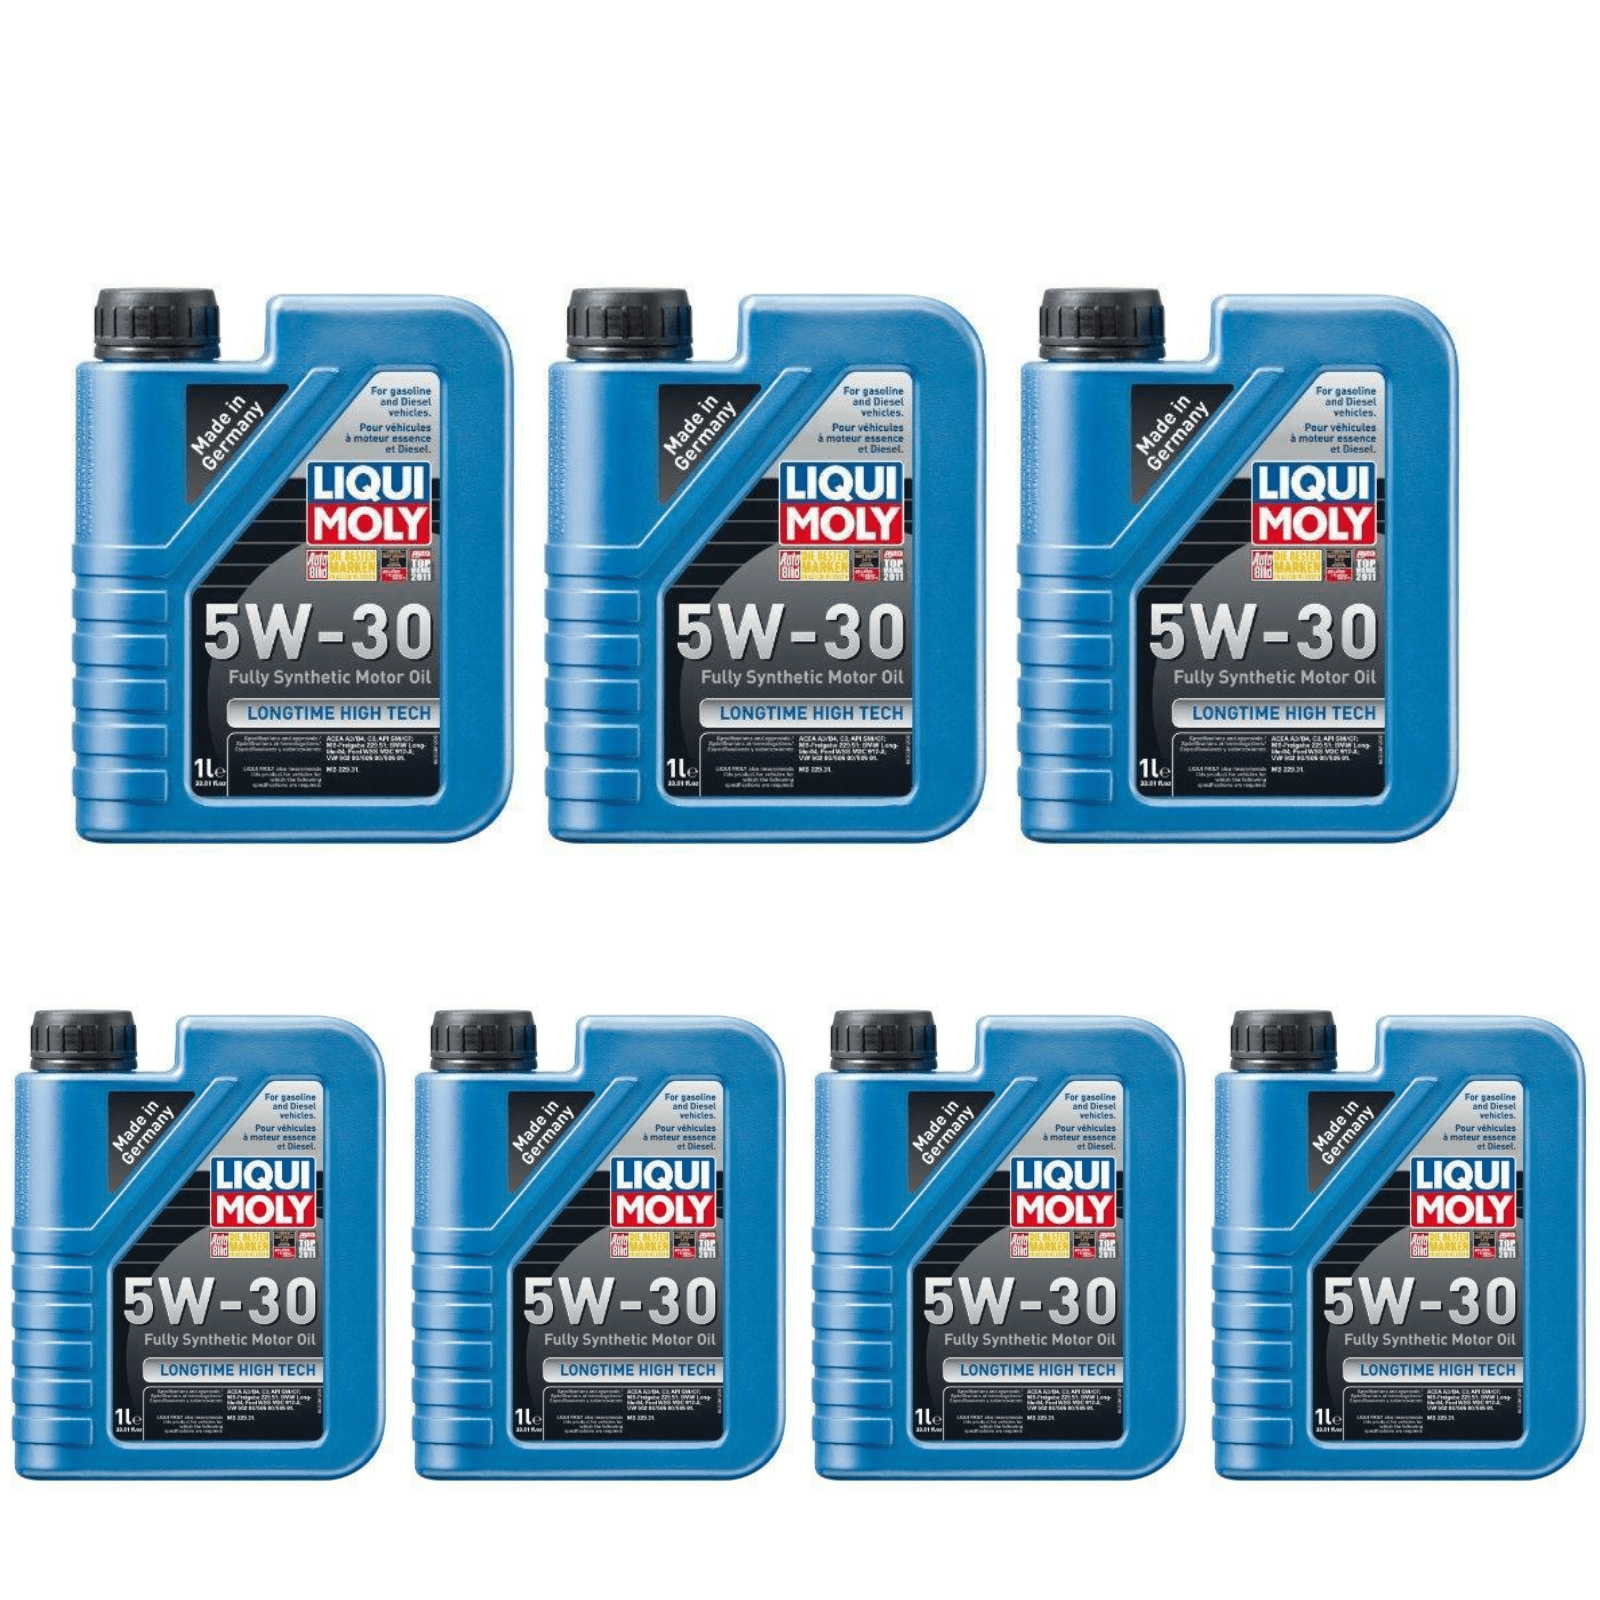 Liqui Moly 2038 Longtime High Tech 5W-30 Synthetic Motor Oil Pack of 7 